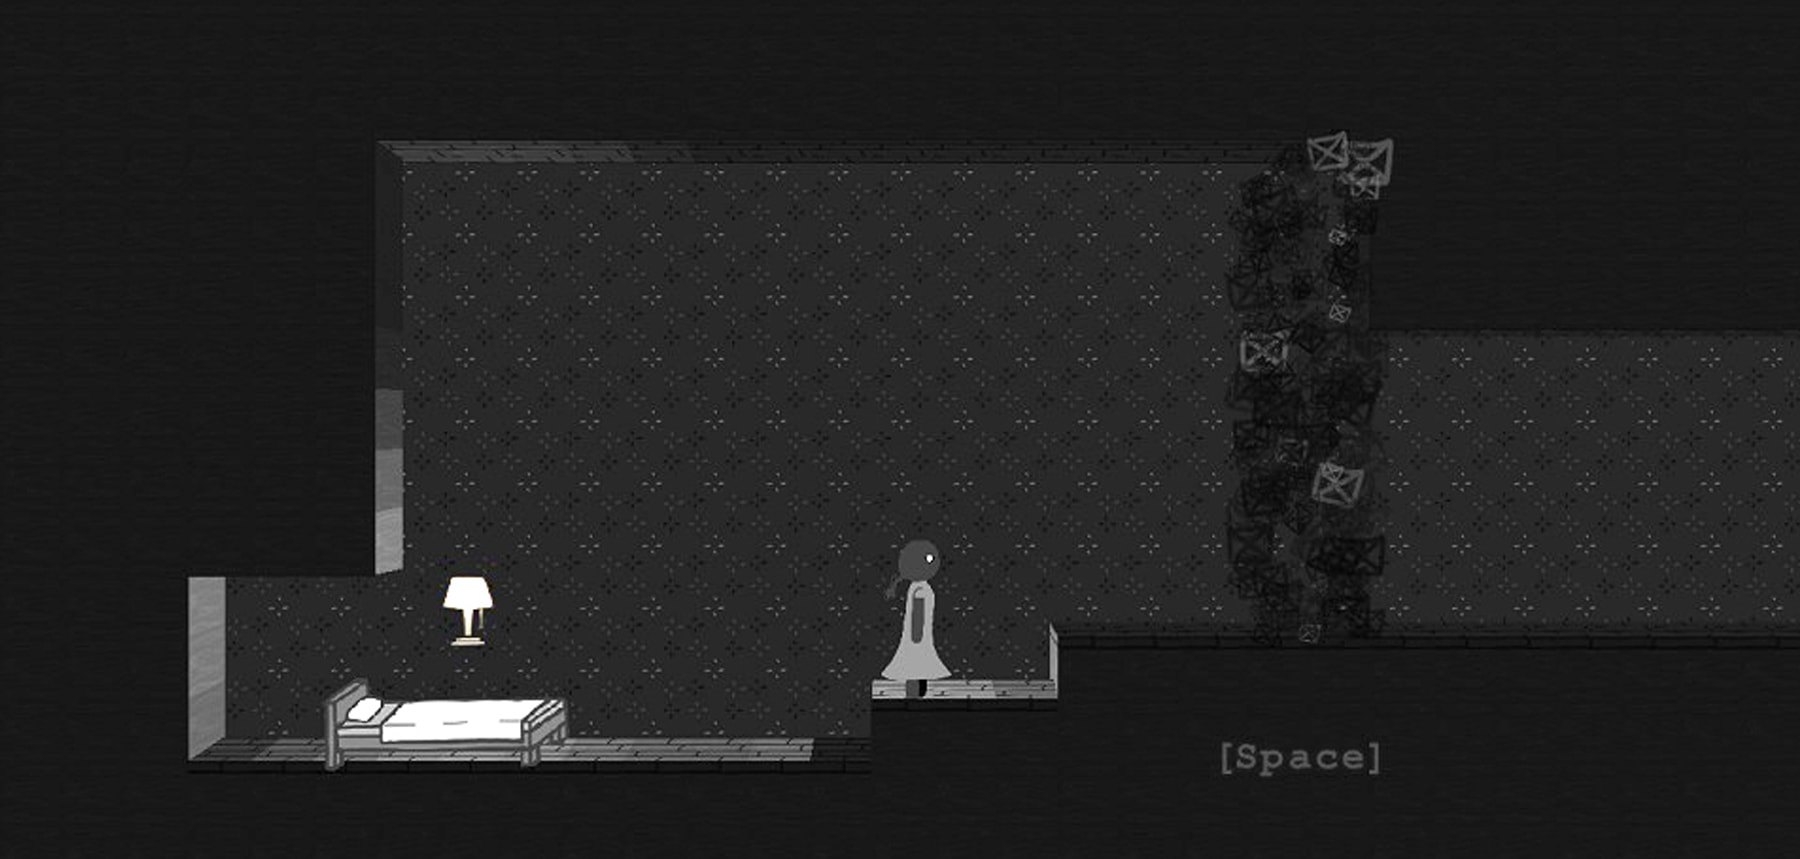 Screenshot from DigiPen student game Close Your Eyes, featuring a girl in a bedroom rendered in grayscale